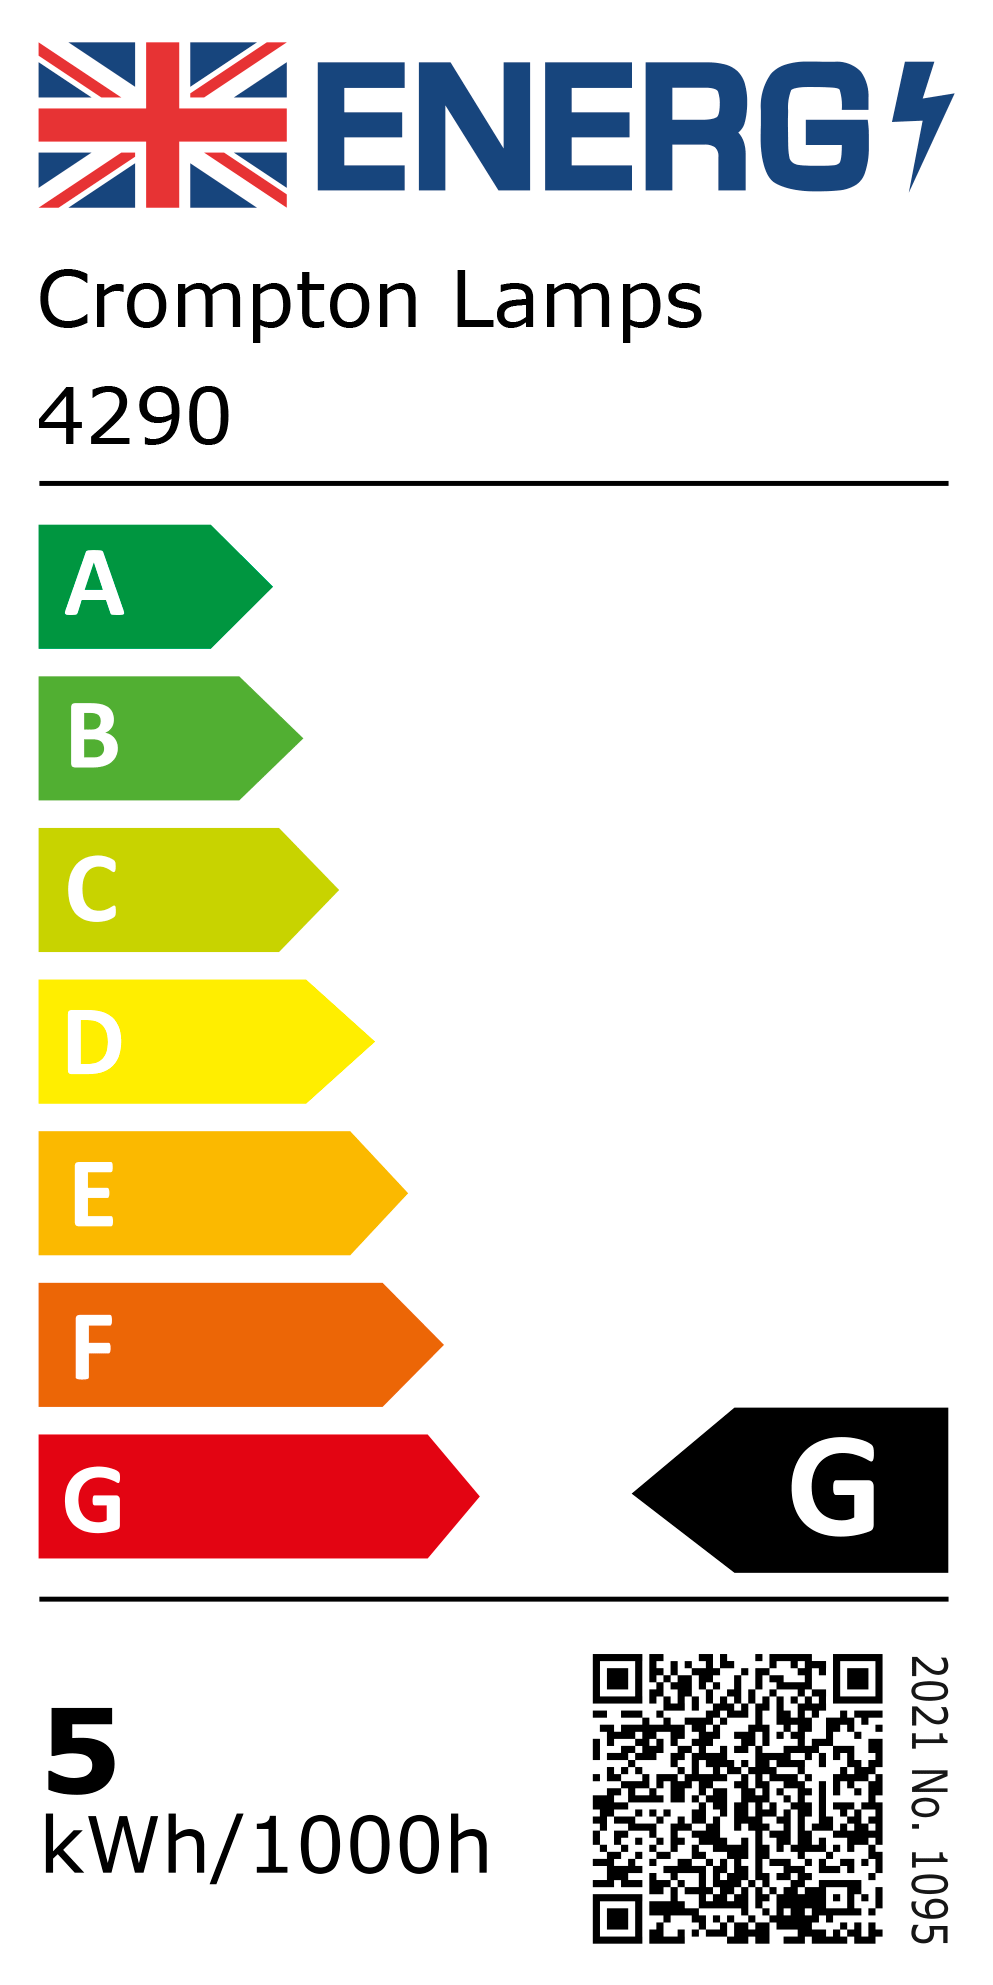 New 2021 Energy Rating Label: Stock Code 4290